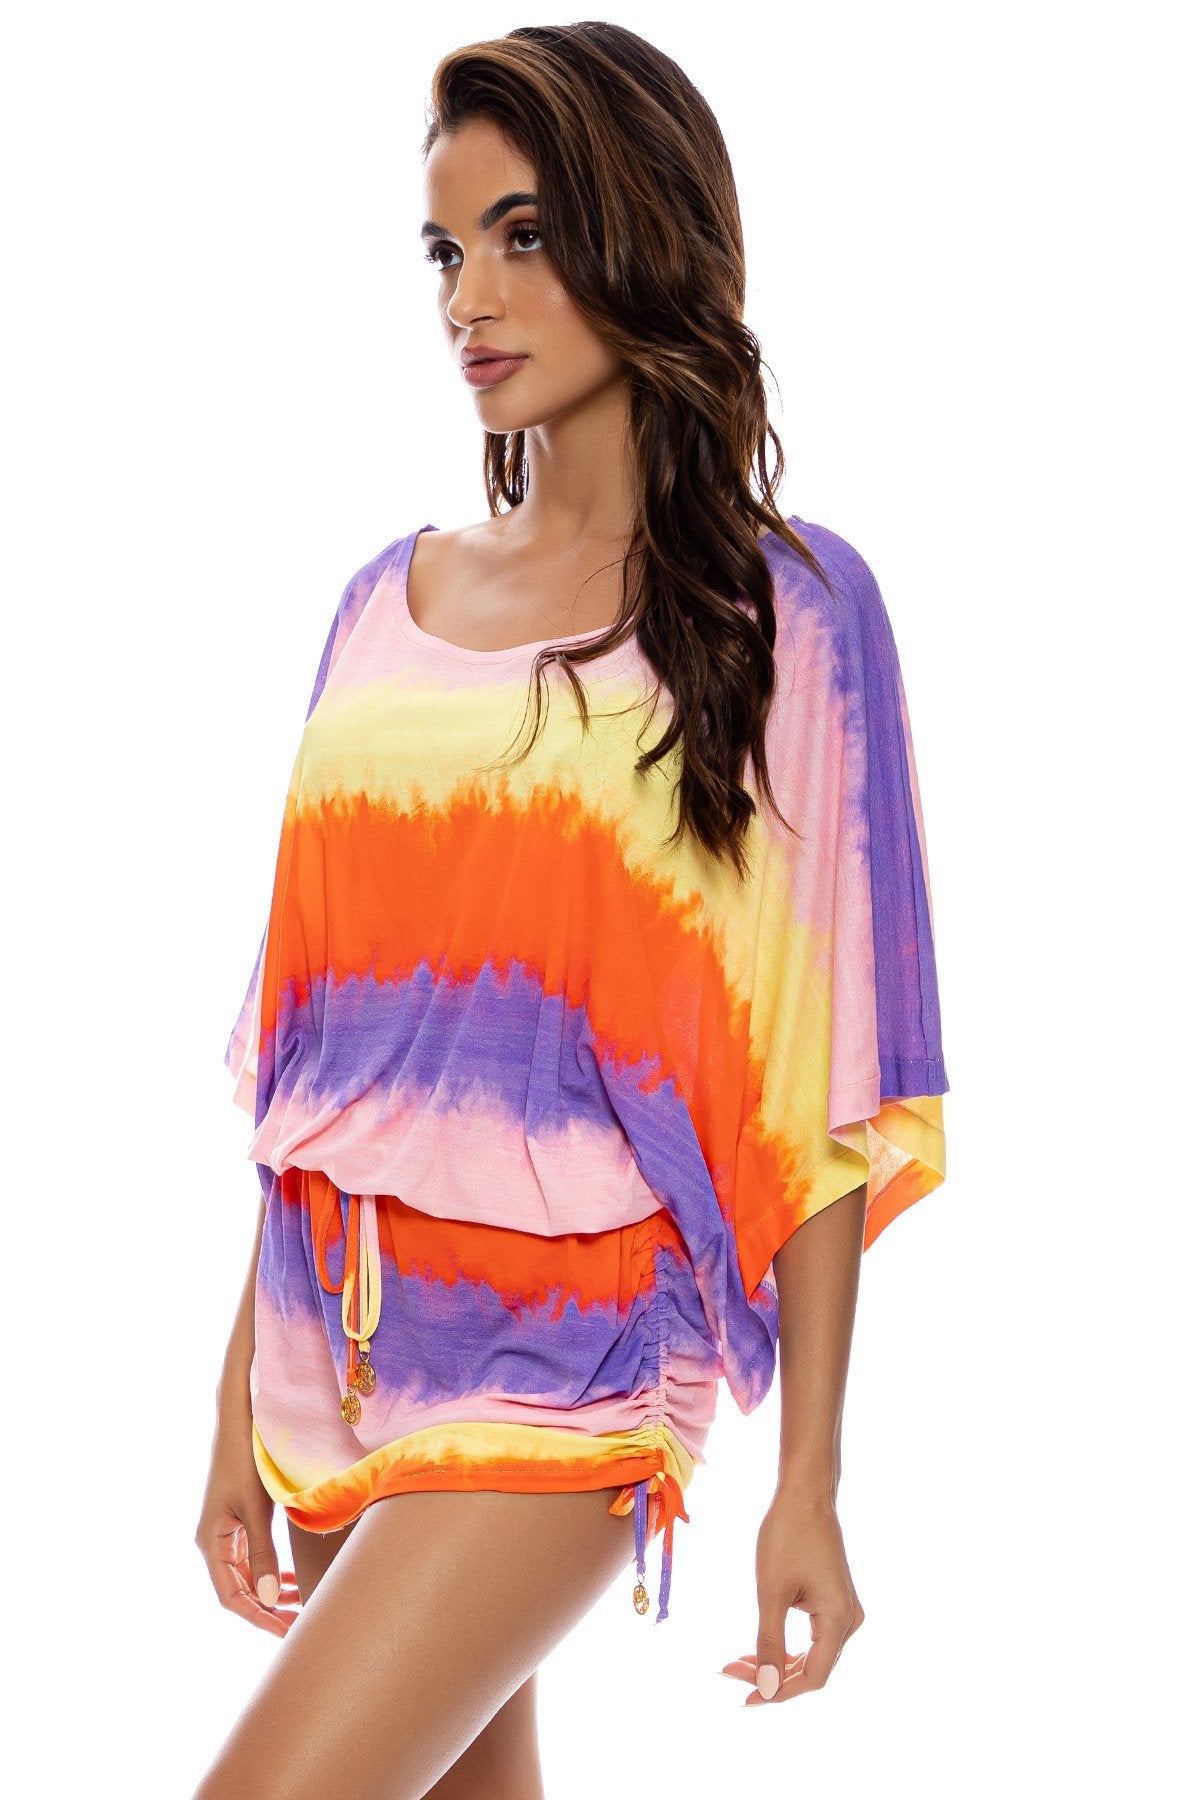 MIAMI SUNSETS - South Beach Dress • Multicolor